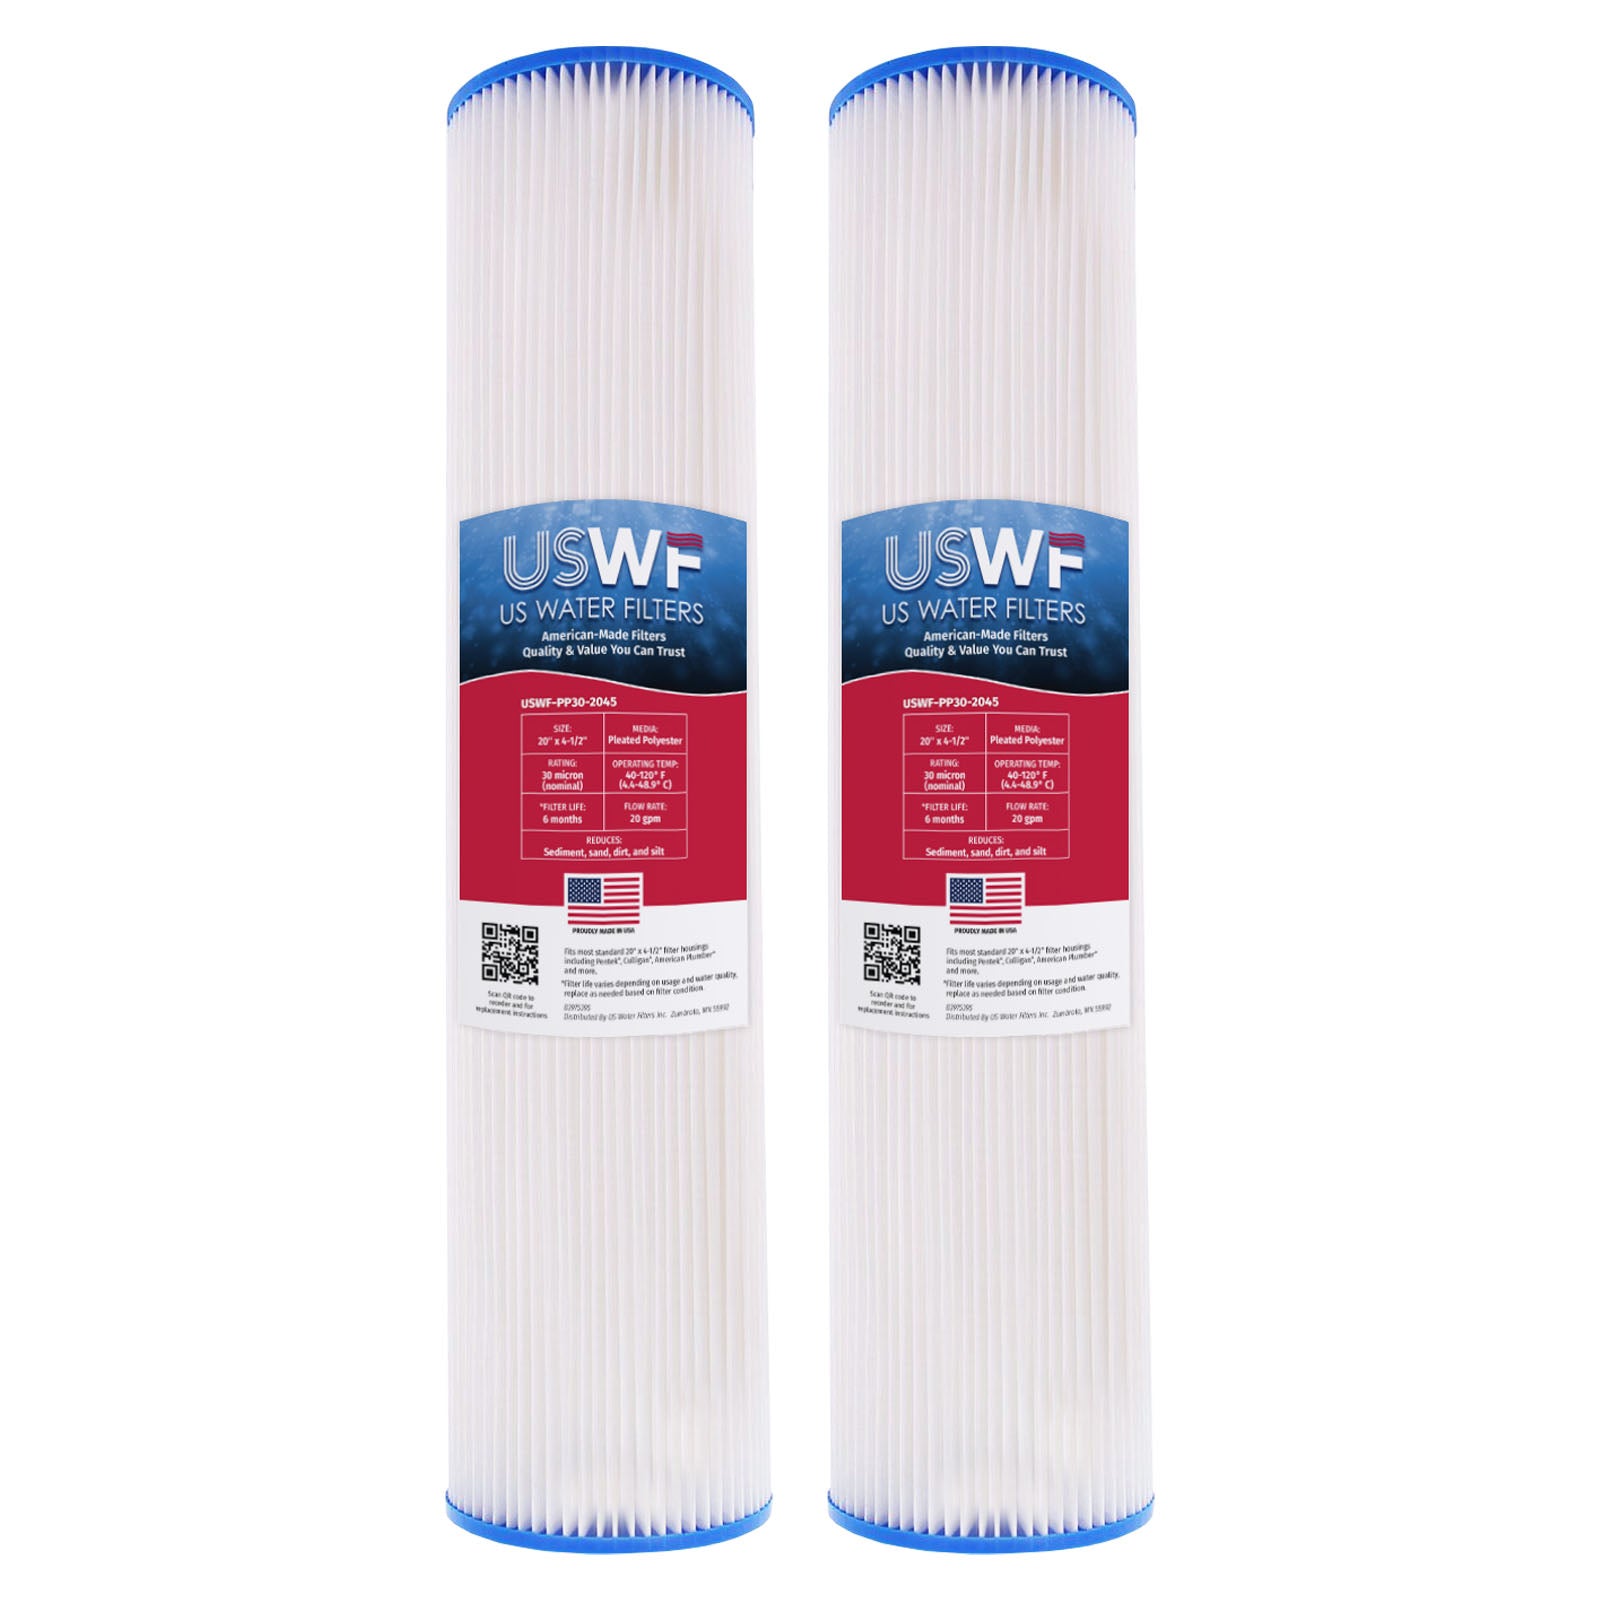 30 Micron Pleated Polyester Sediment Filter by USWF 20"x4.5"